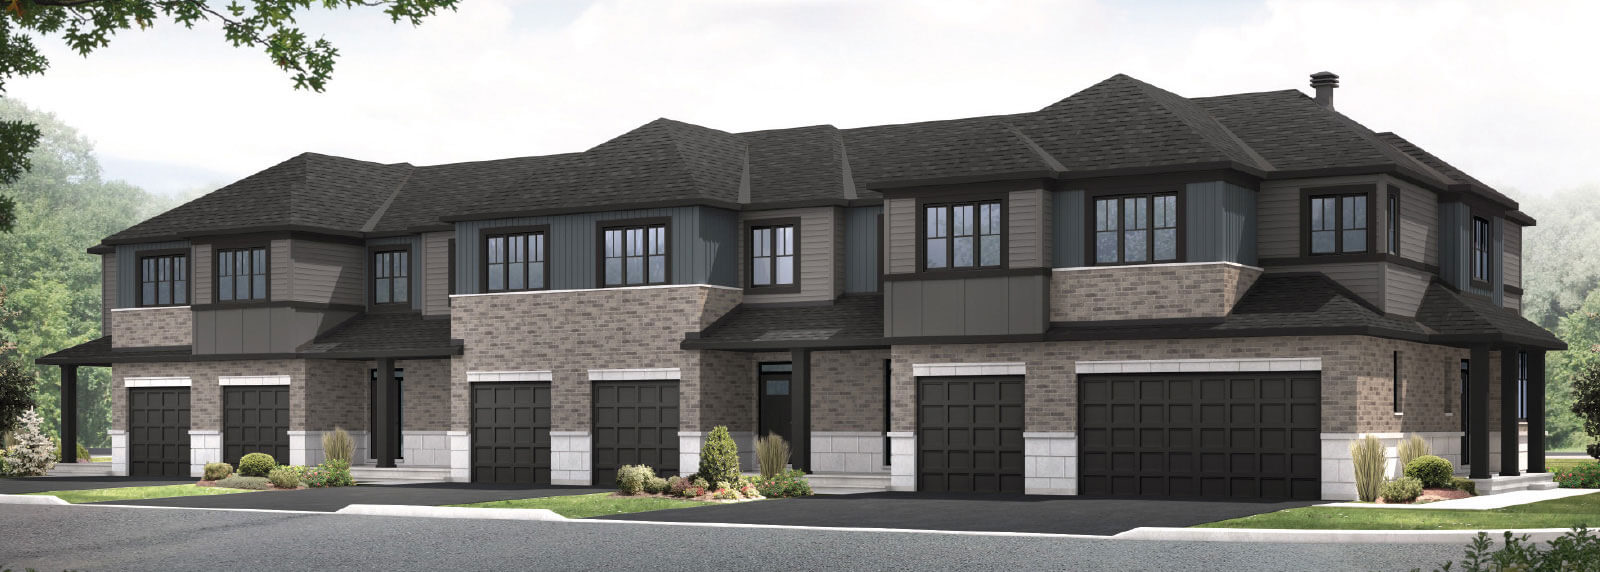 New Calgary Single Family Home Alder in Shawnee Park, located at 511 EdenWylde Drive, Stittsville Built By Cardel Homes Calgary